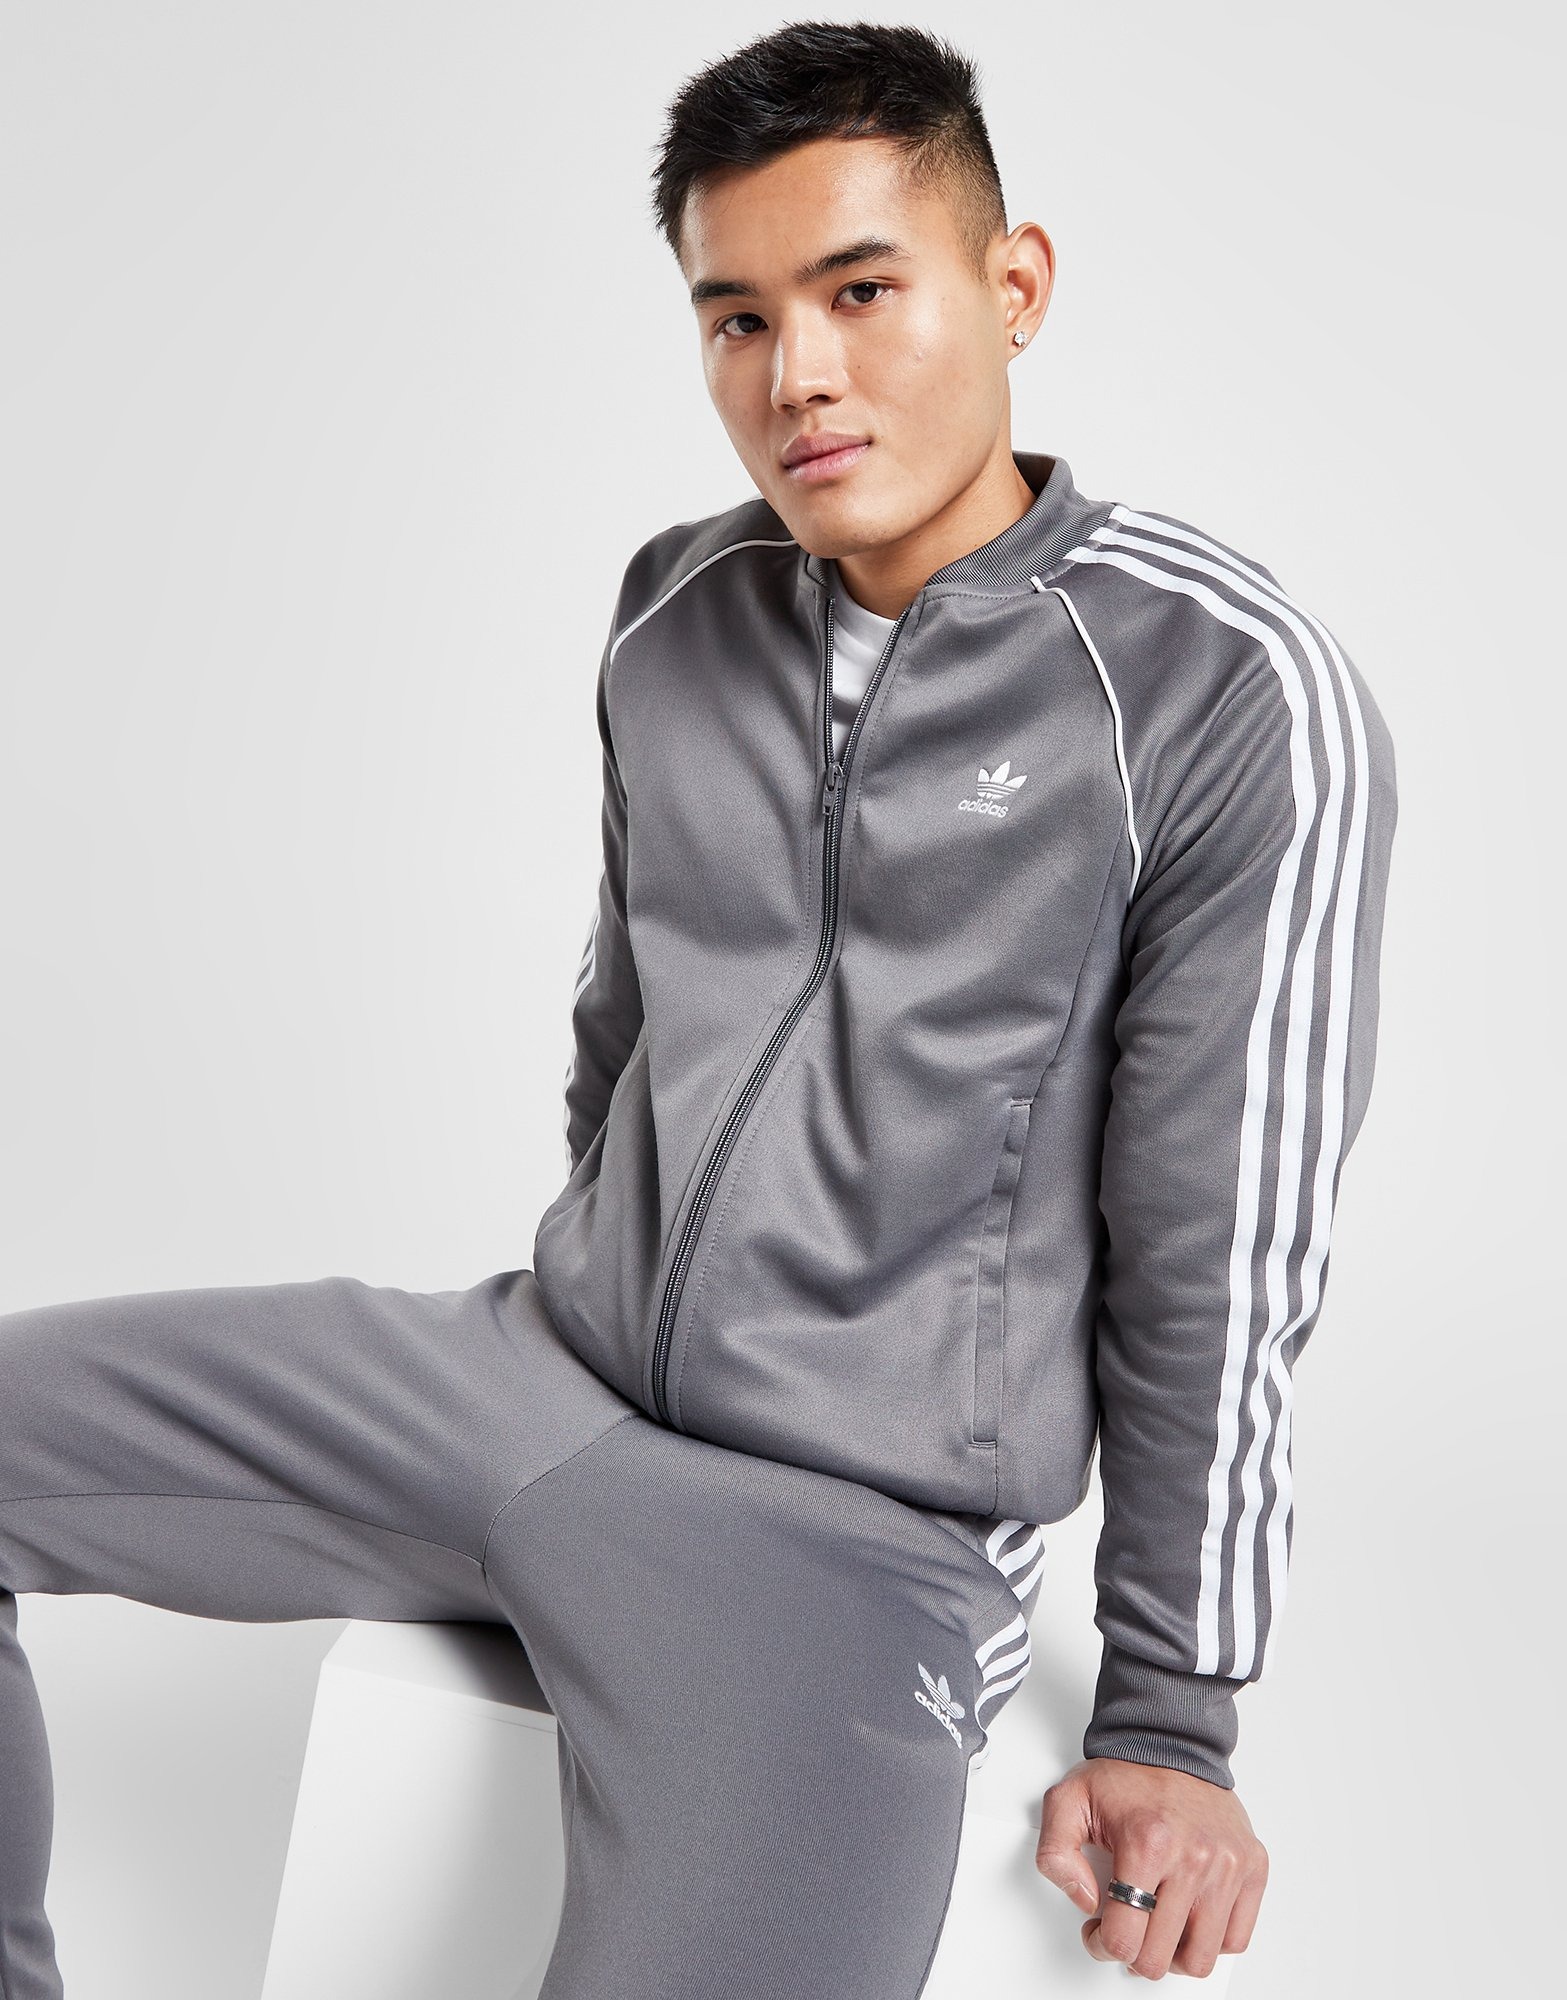 aparato yeso preocuparse Grey adidas Originals SST Track Top | JD Sports Global